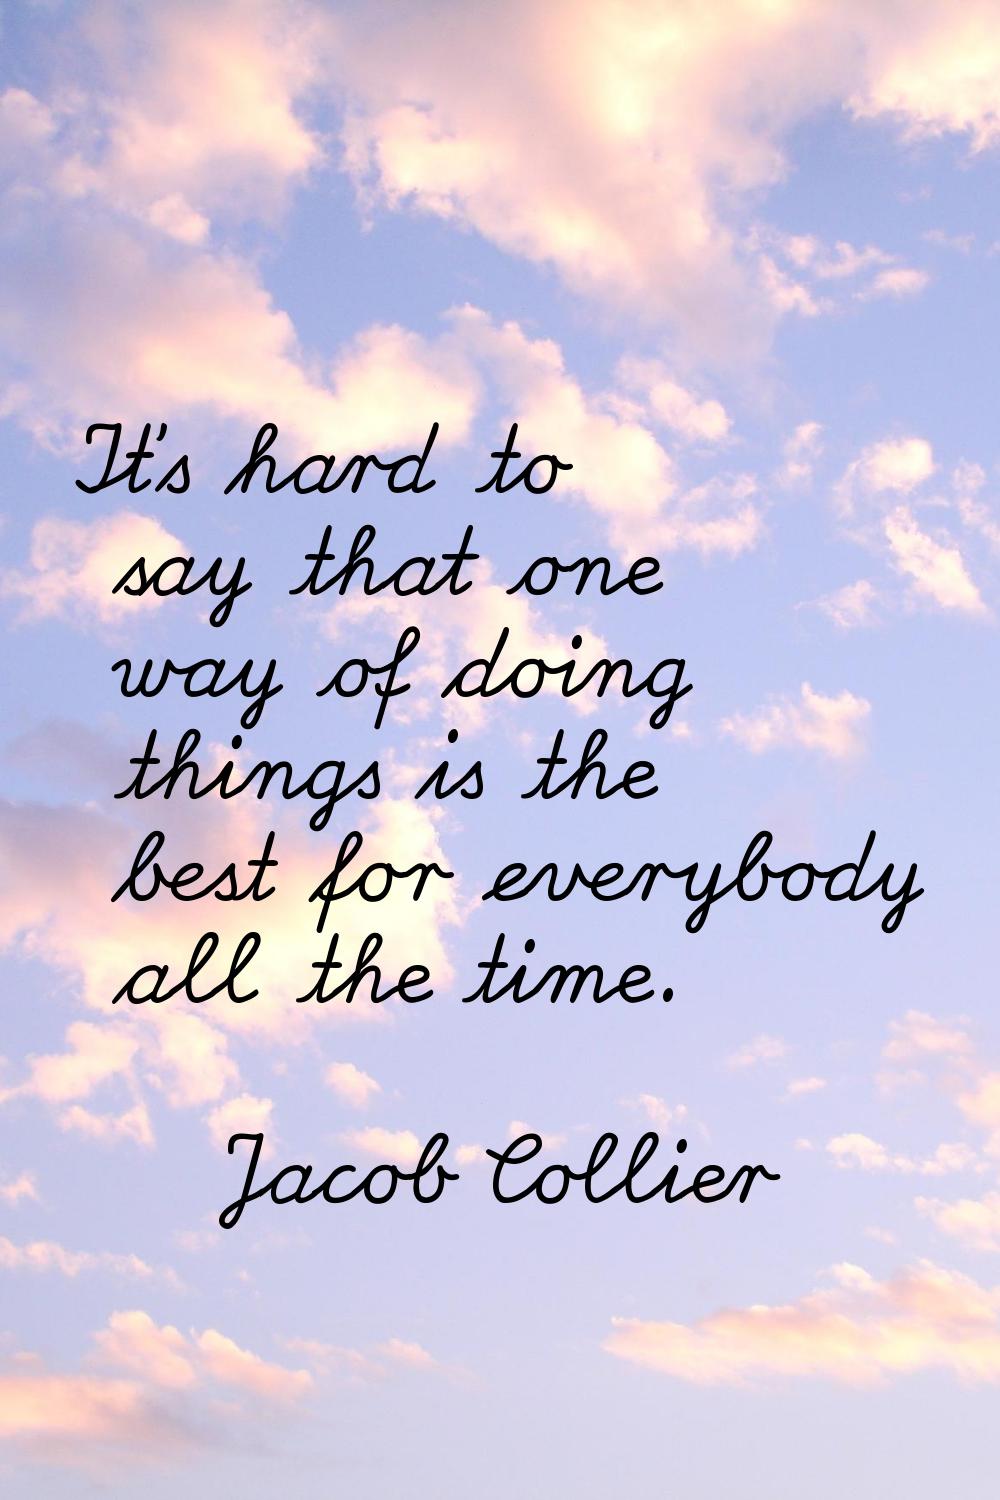 It's hard to say that one way of doing things is the best for everybody all the time.